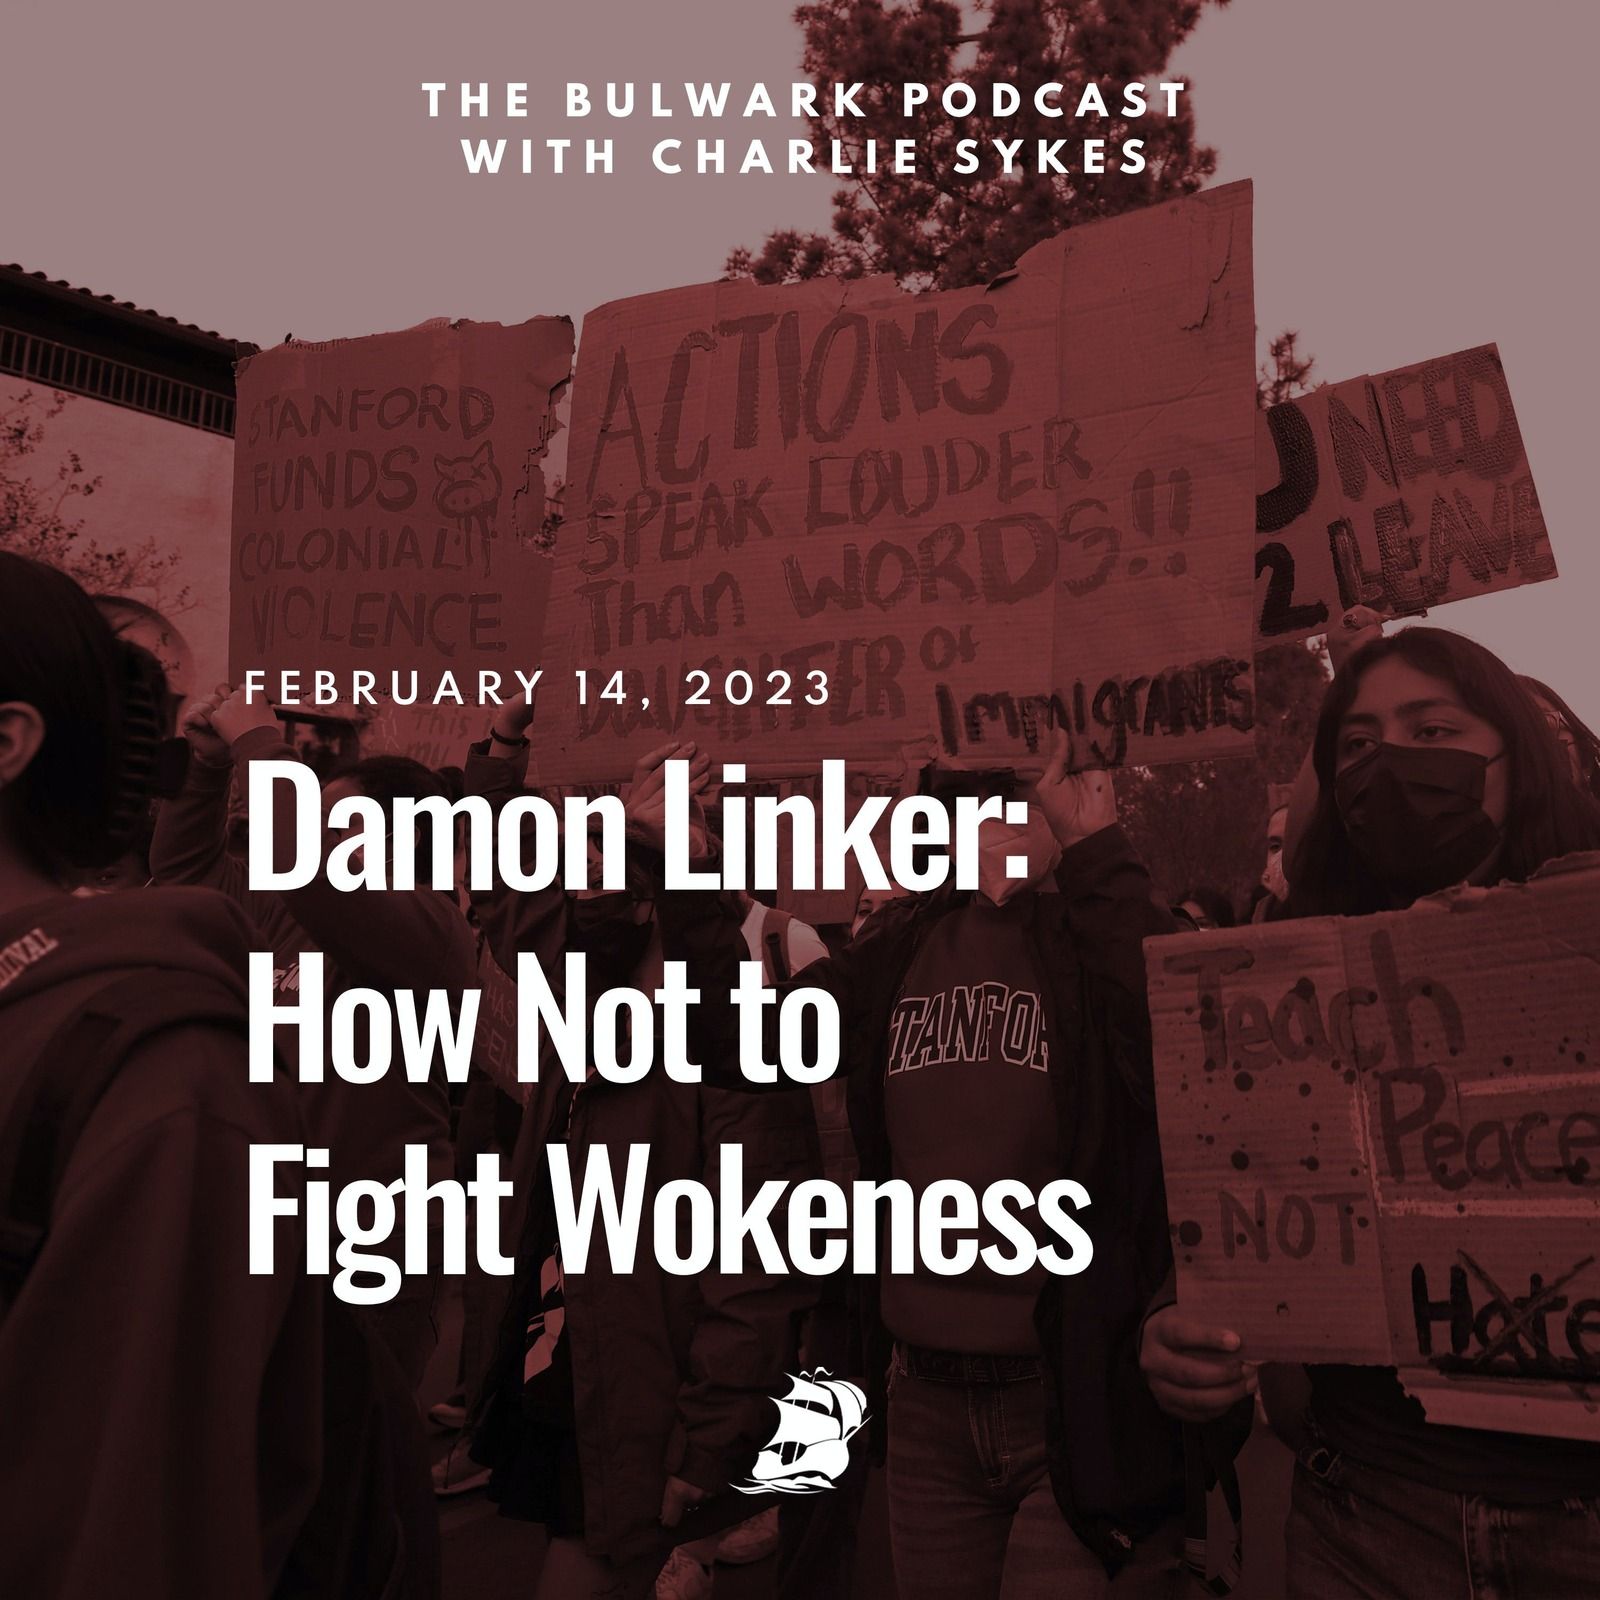 Damon Linker: How Not to Fight Wokeness by The Bulwark Podcast